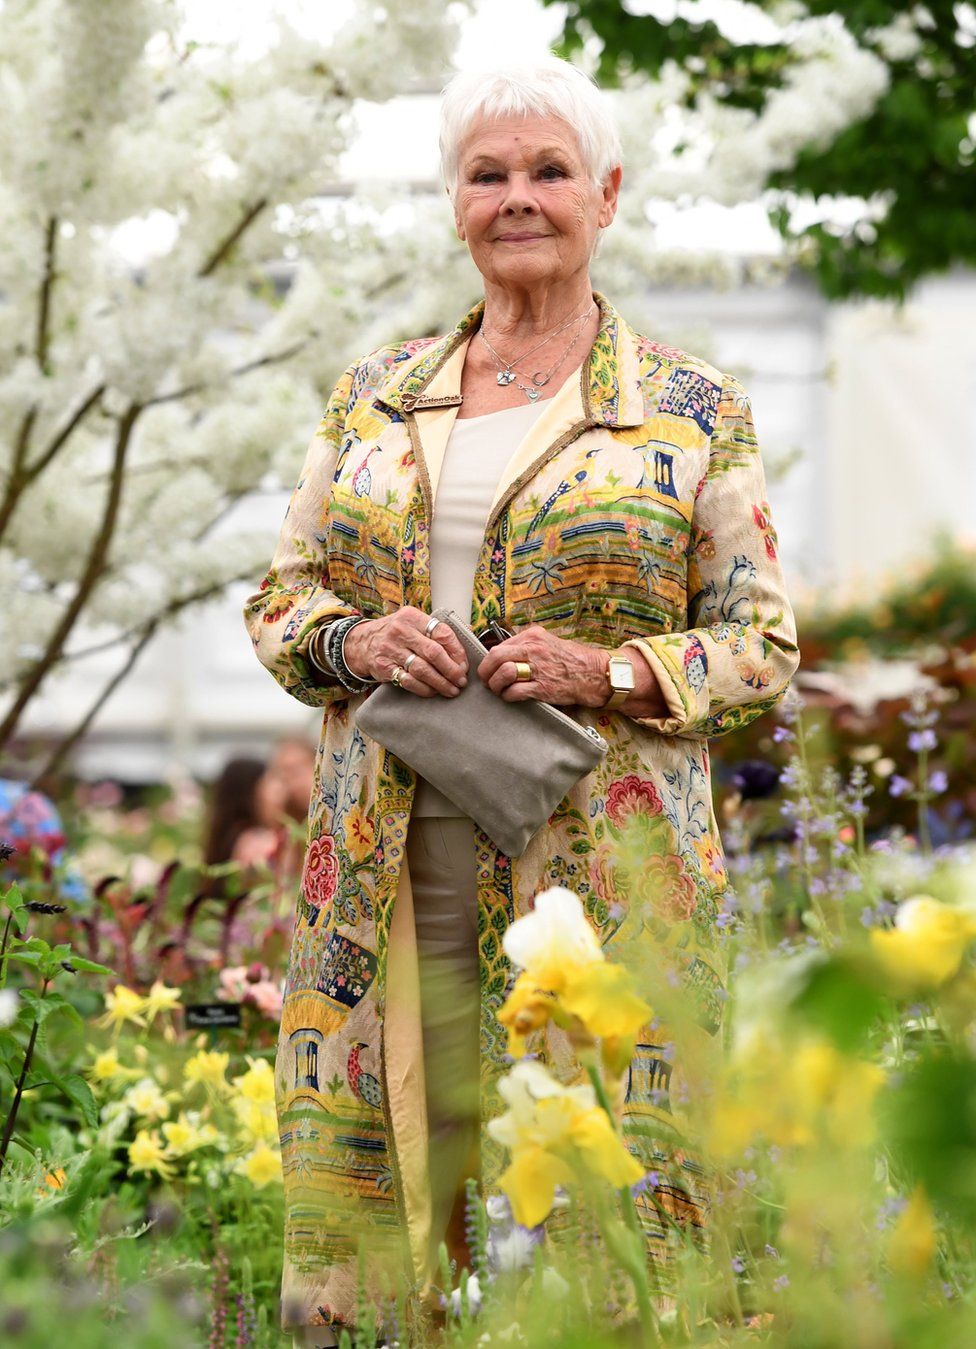 rhs chelsea flower show 2019: in pictures - bbc news